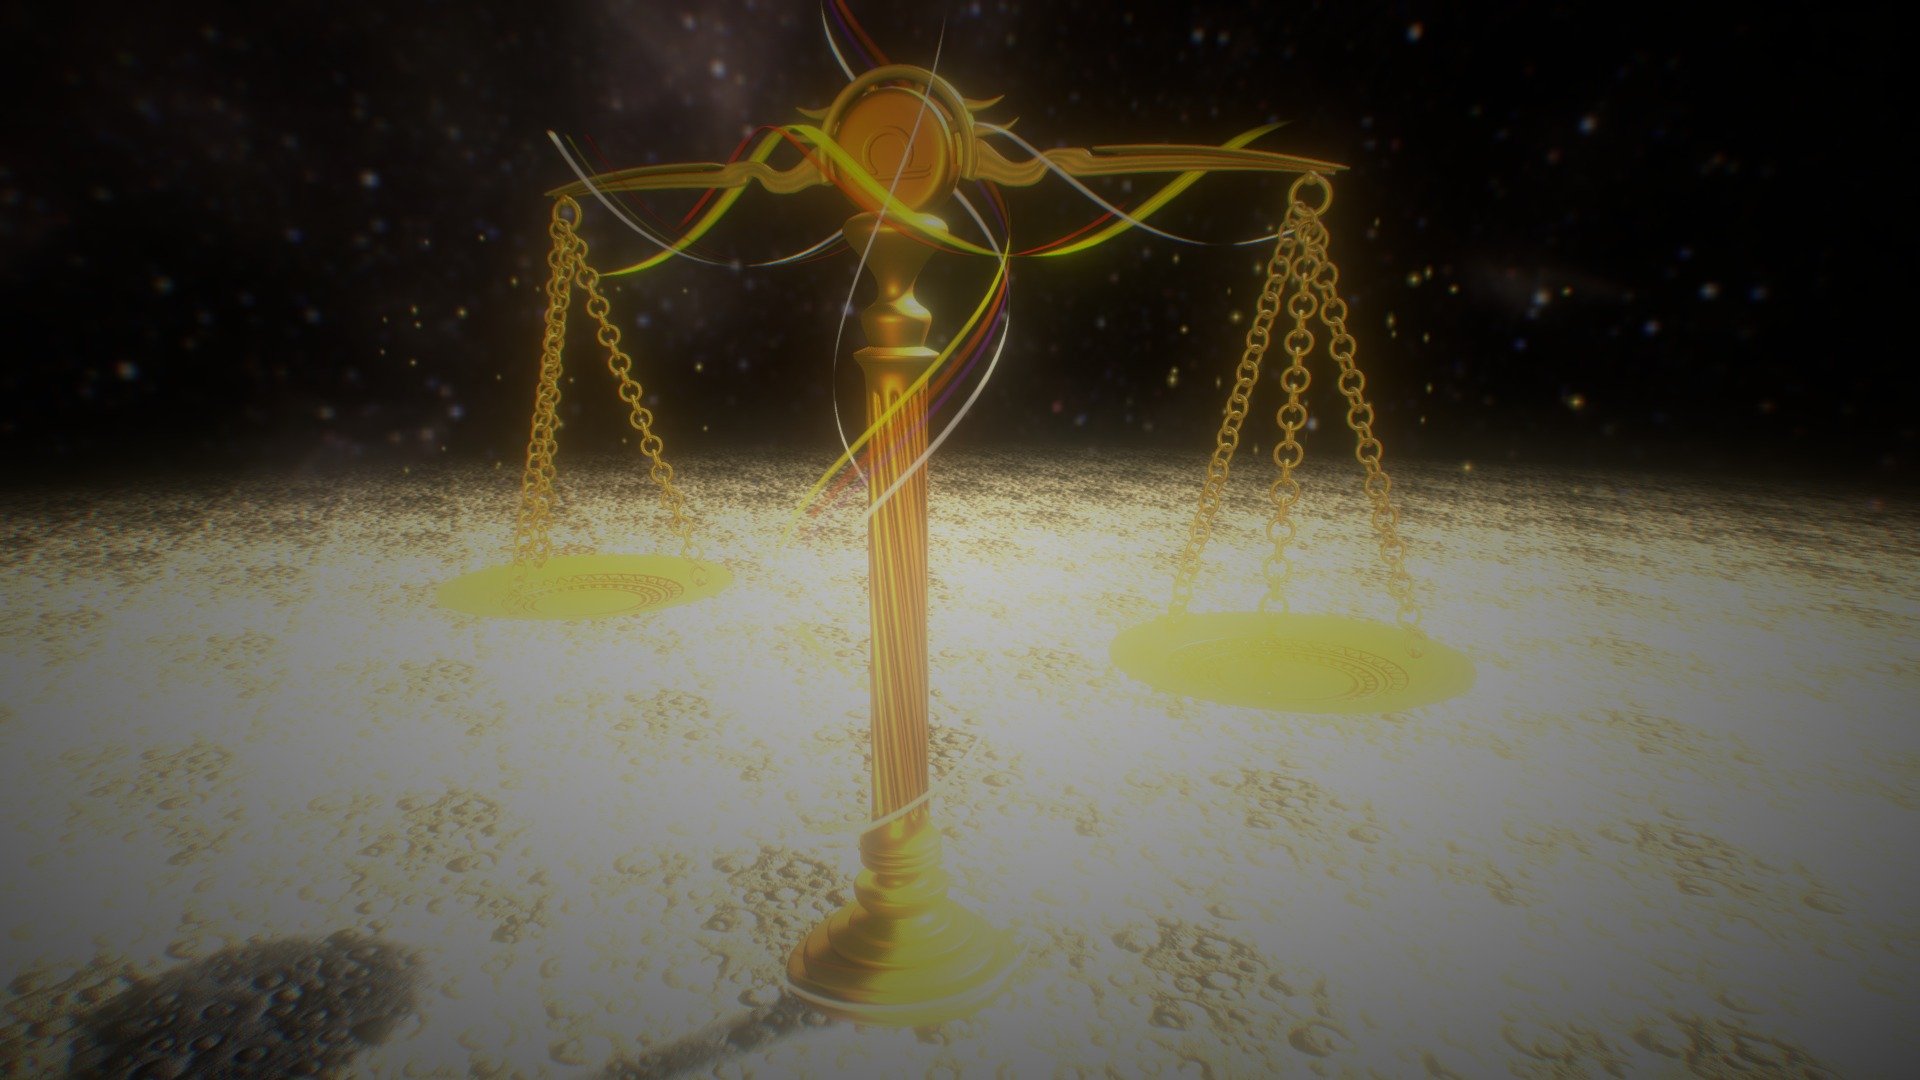 Libra (♎) is the seventh astrological sign in the Zodiac. It spans the 180–210th degree of the zodiac, between 180 and 207.25 degree of celestial longitude. Under the tropical zodiac, Sun transits this area on average between (northern autumnal equinox) September 23 and October 22, and under the sidereal zodiac, the sun currently transits the constellation of Libra from approximately October 16 to November 17.  The symbol of the scales is based on the Scales of Justice held by Themis, the Greek personification of divine law and custom. She became the inspiration for modern depictions of Lady Justice. The ruling planet of Libra is Venus 3d model